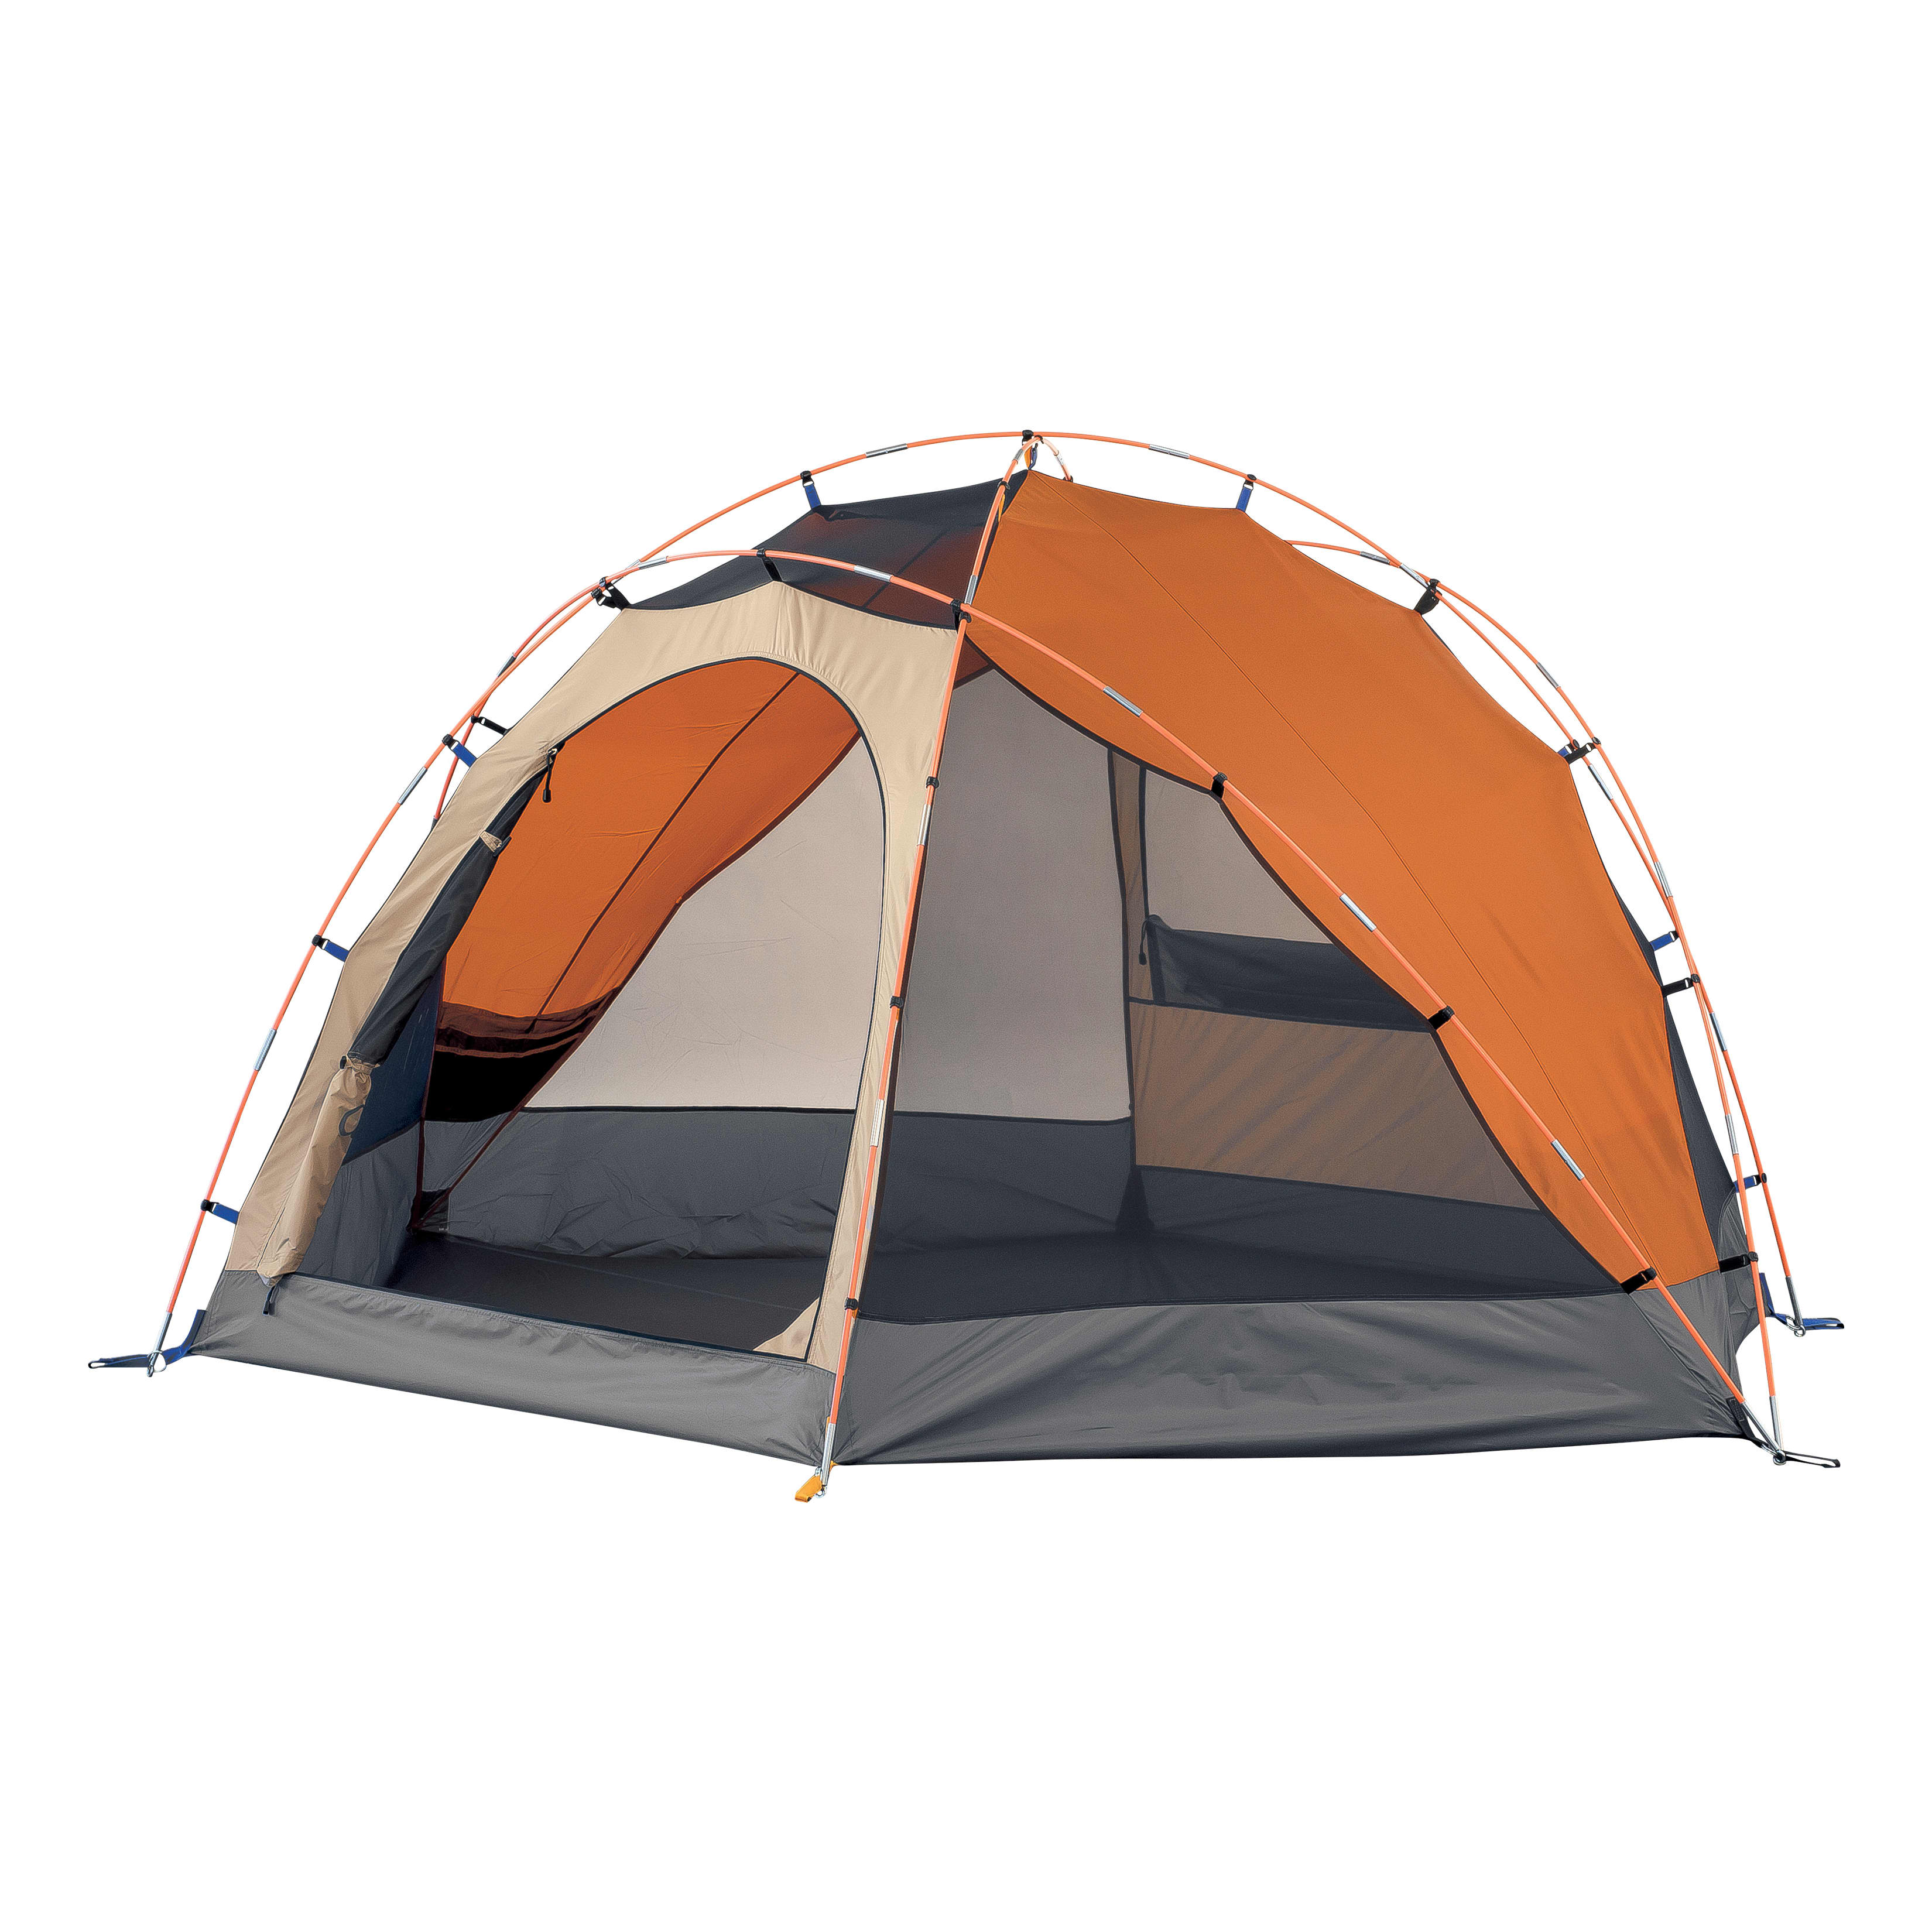 Cabela’s West Wind™ Dome Tent - Without fly - Door open - Orange,Cabela’s West Wind™ Dome Tent - Without fly - Door open - Orange